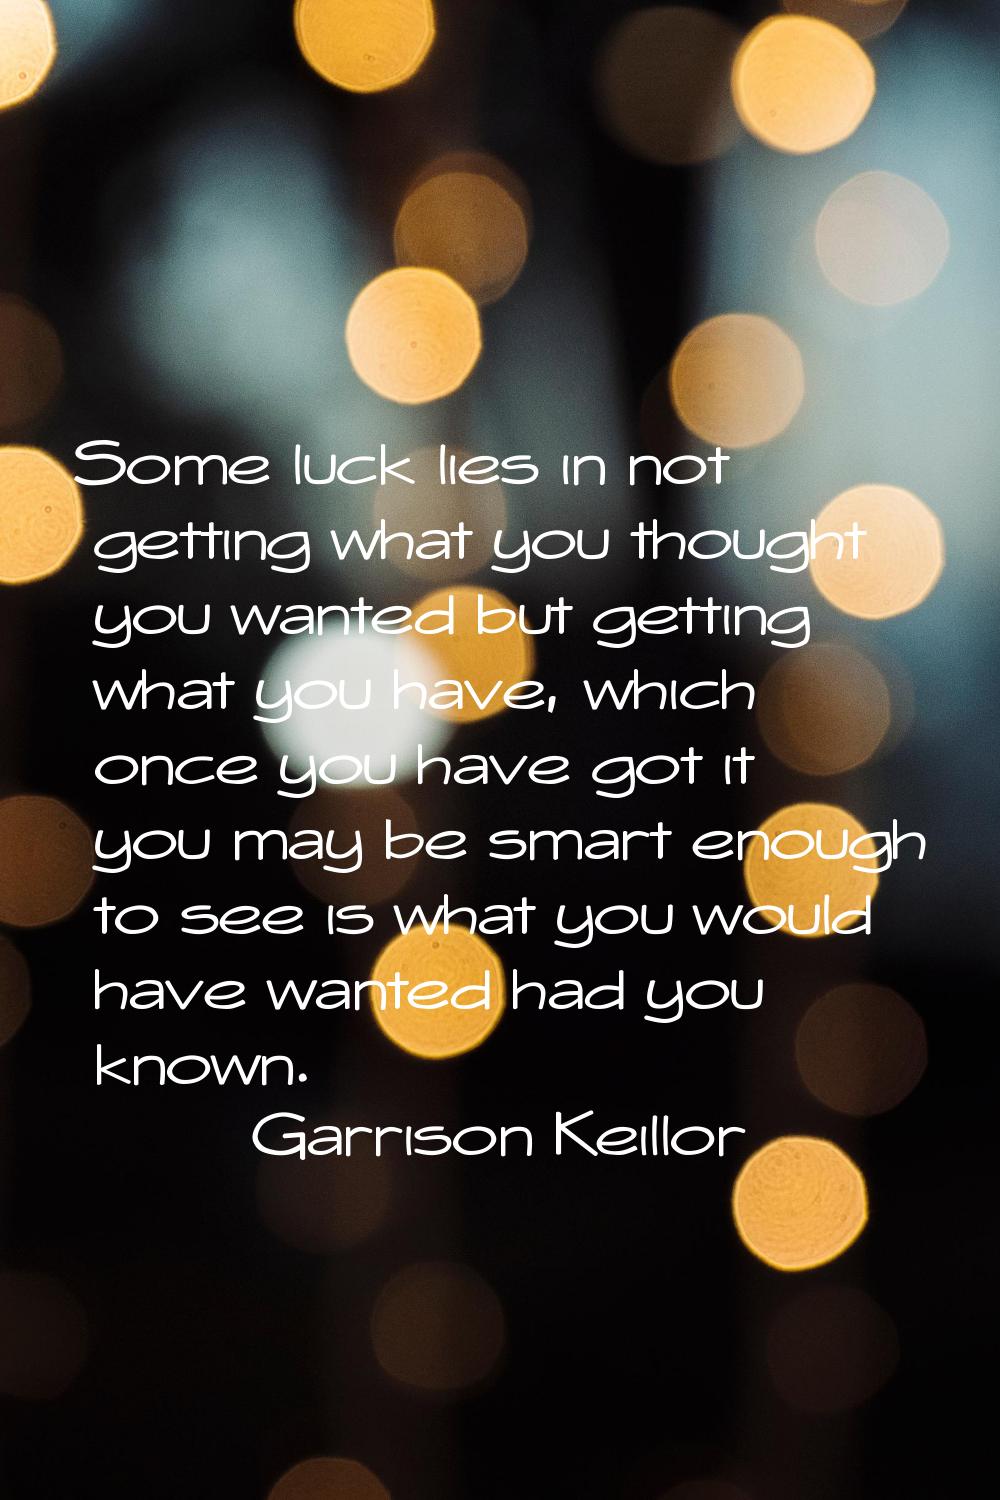 Some luck lies in not getting what you thought you wanted but getting what you have, which once you